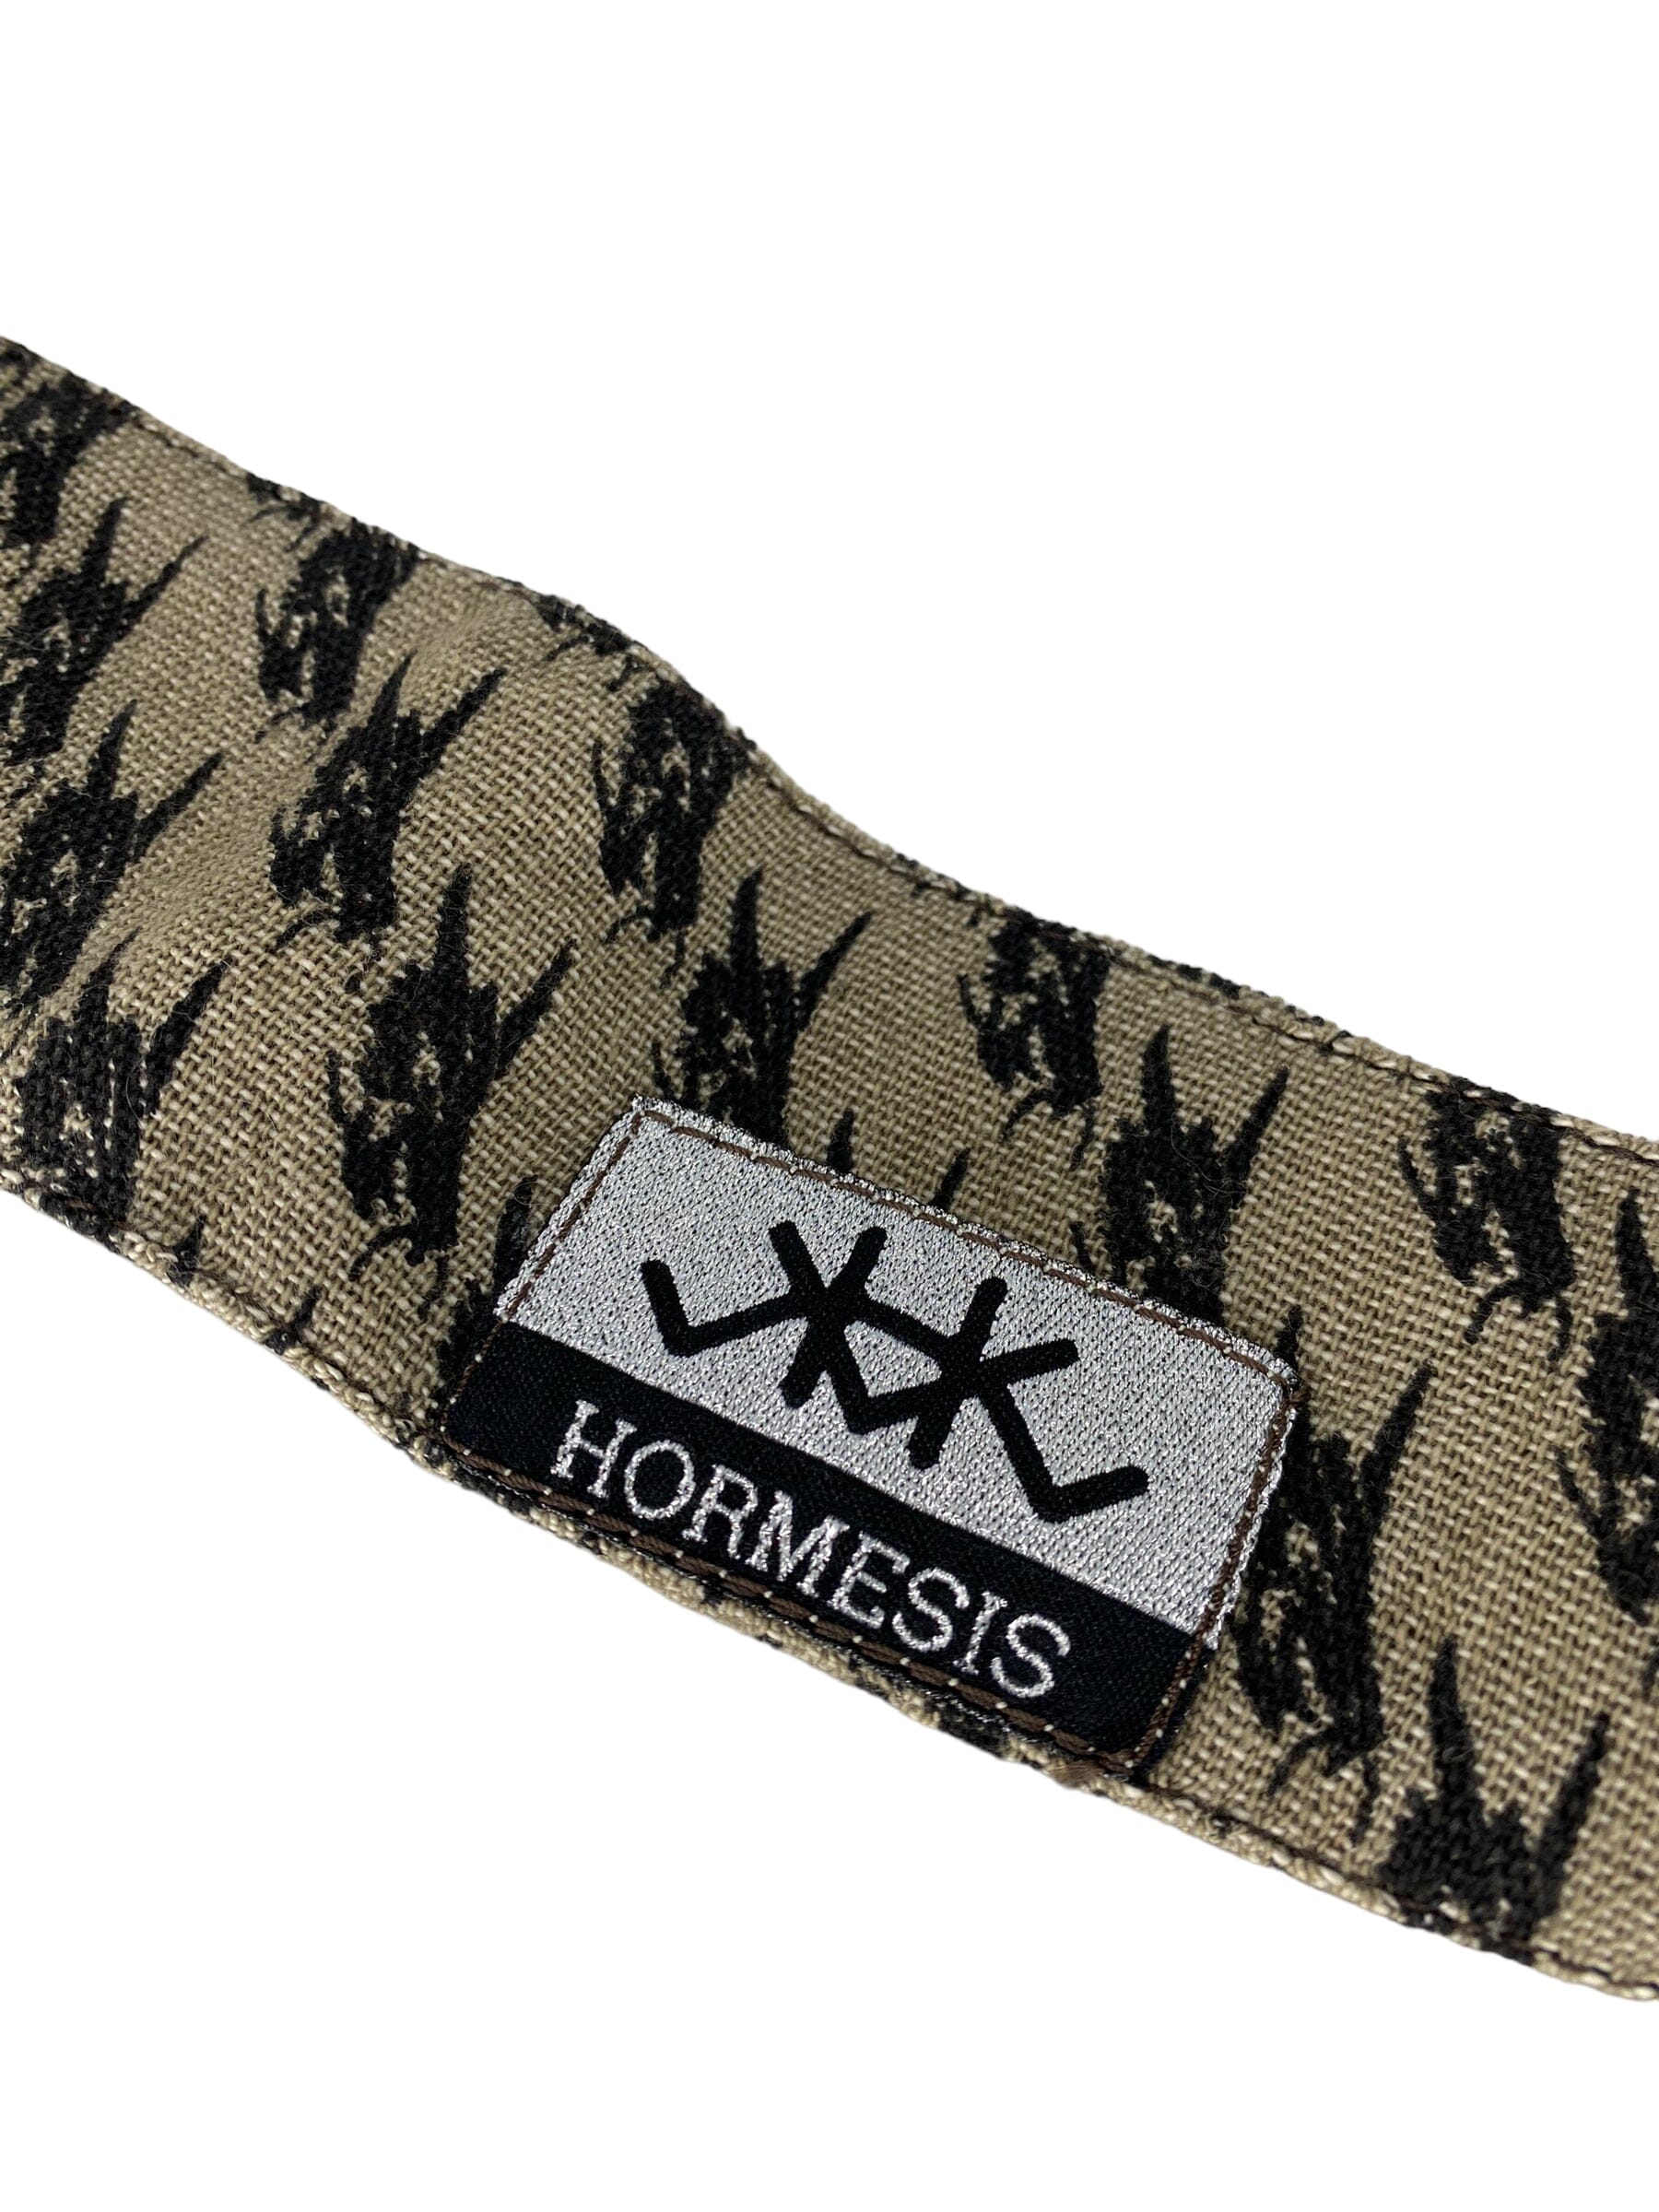 Used Hormesis Headband Paintball Gun from CPXBrosPaintball Buy/Sell/Trade Paintball Markers, Paintball Hoppers, Paintball Masks, and Hormesis Headbands